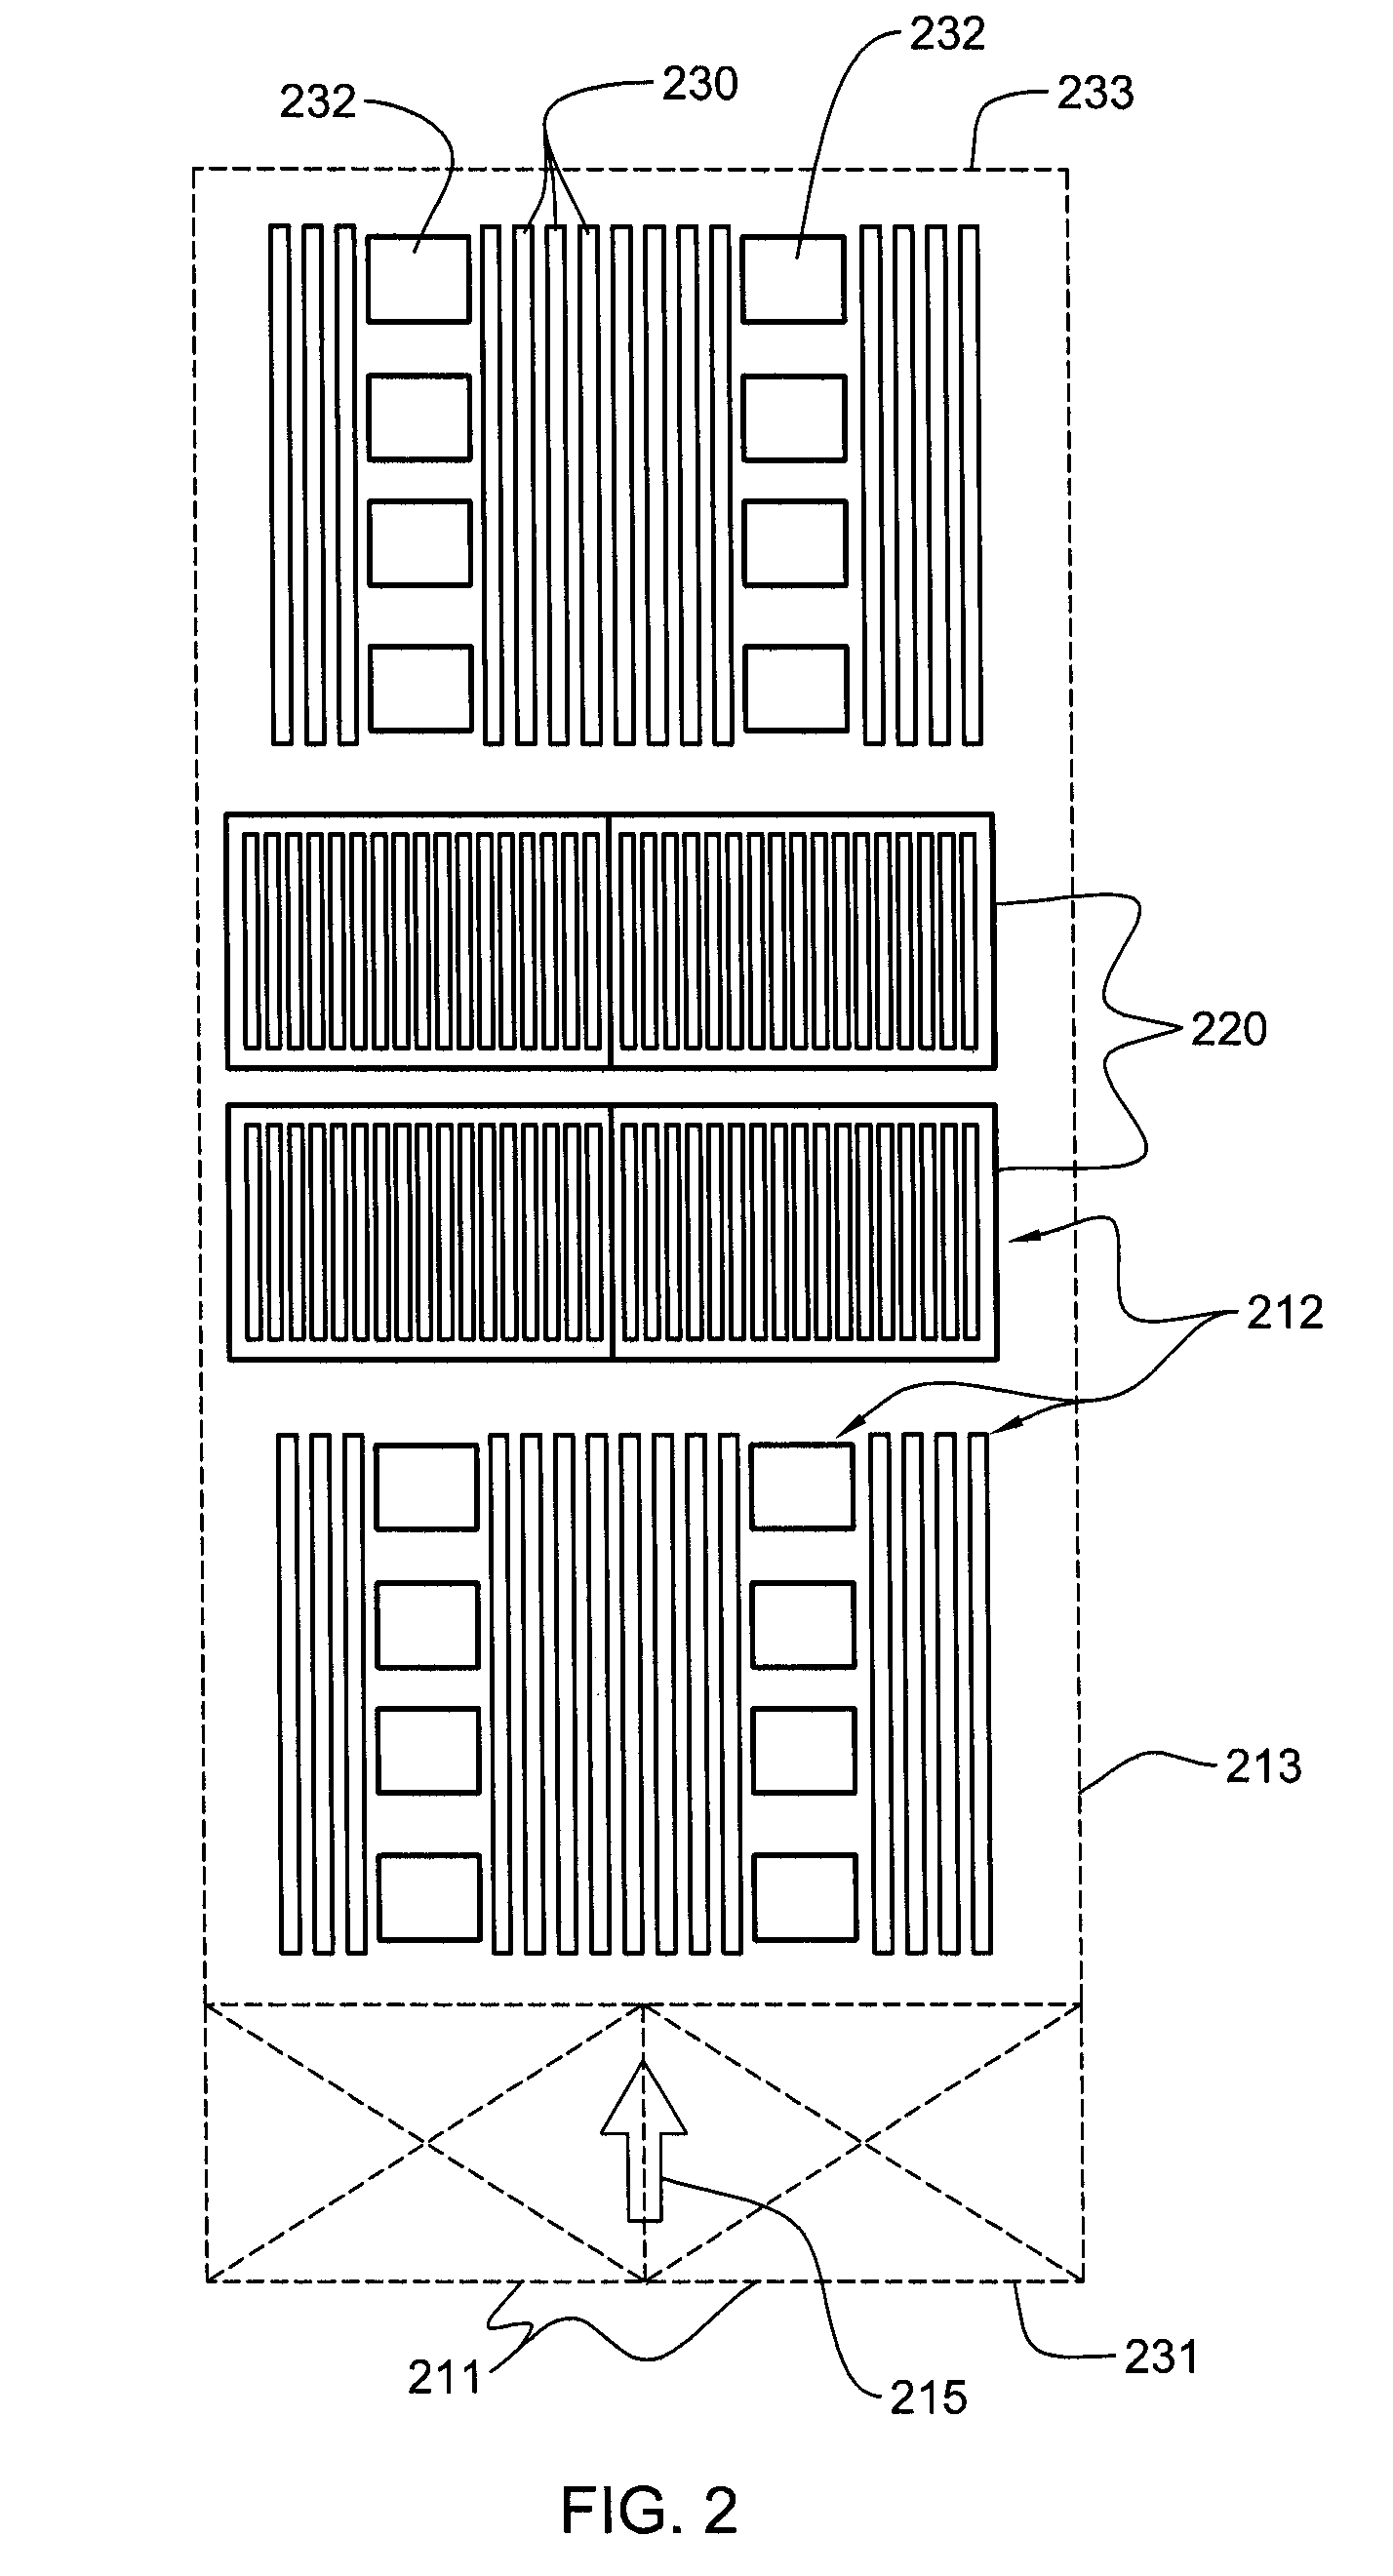 Methods for configuring tubing for interconnecting in-series multiple liquid-cooled cold plates